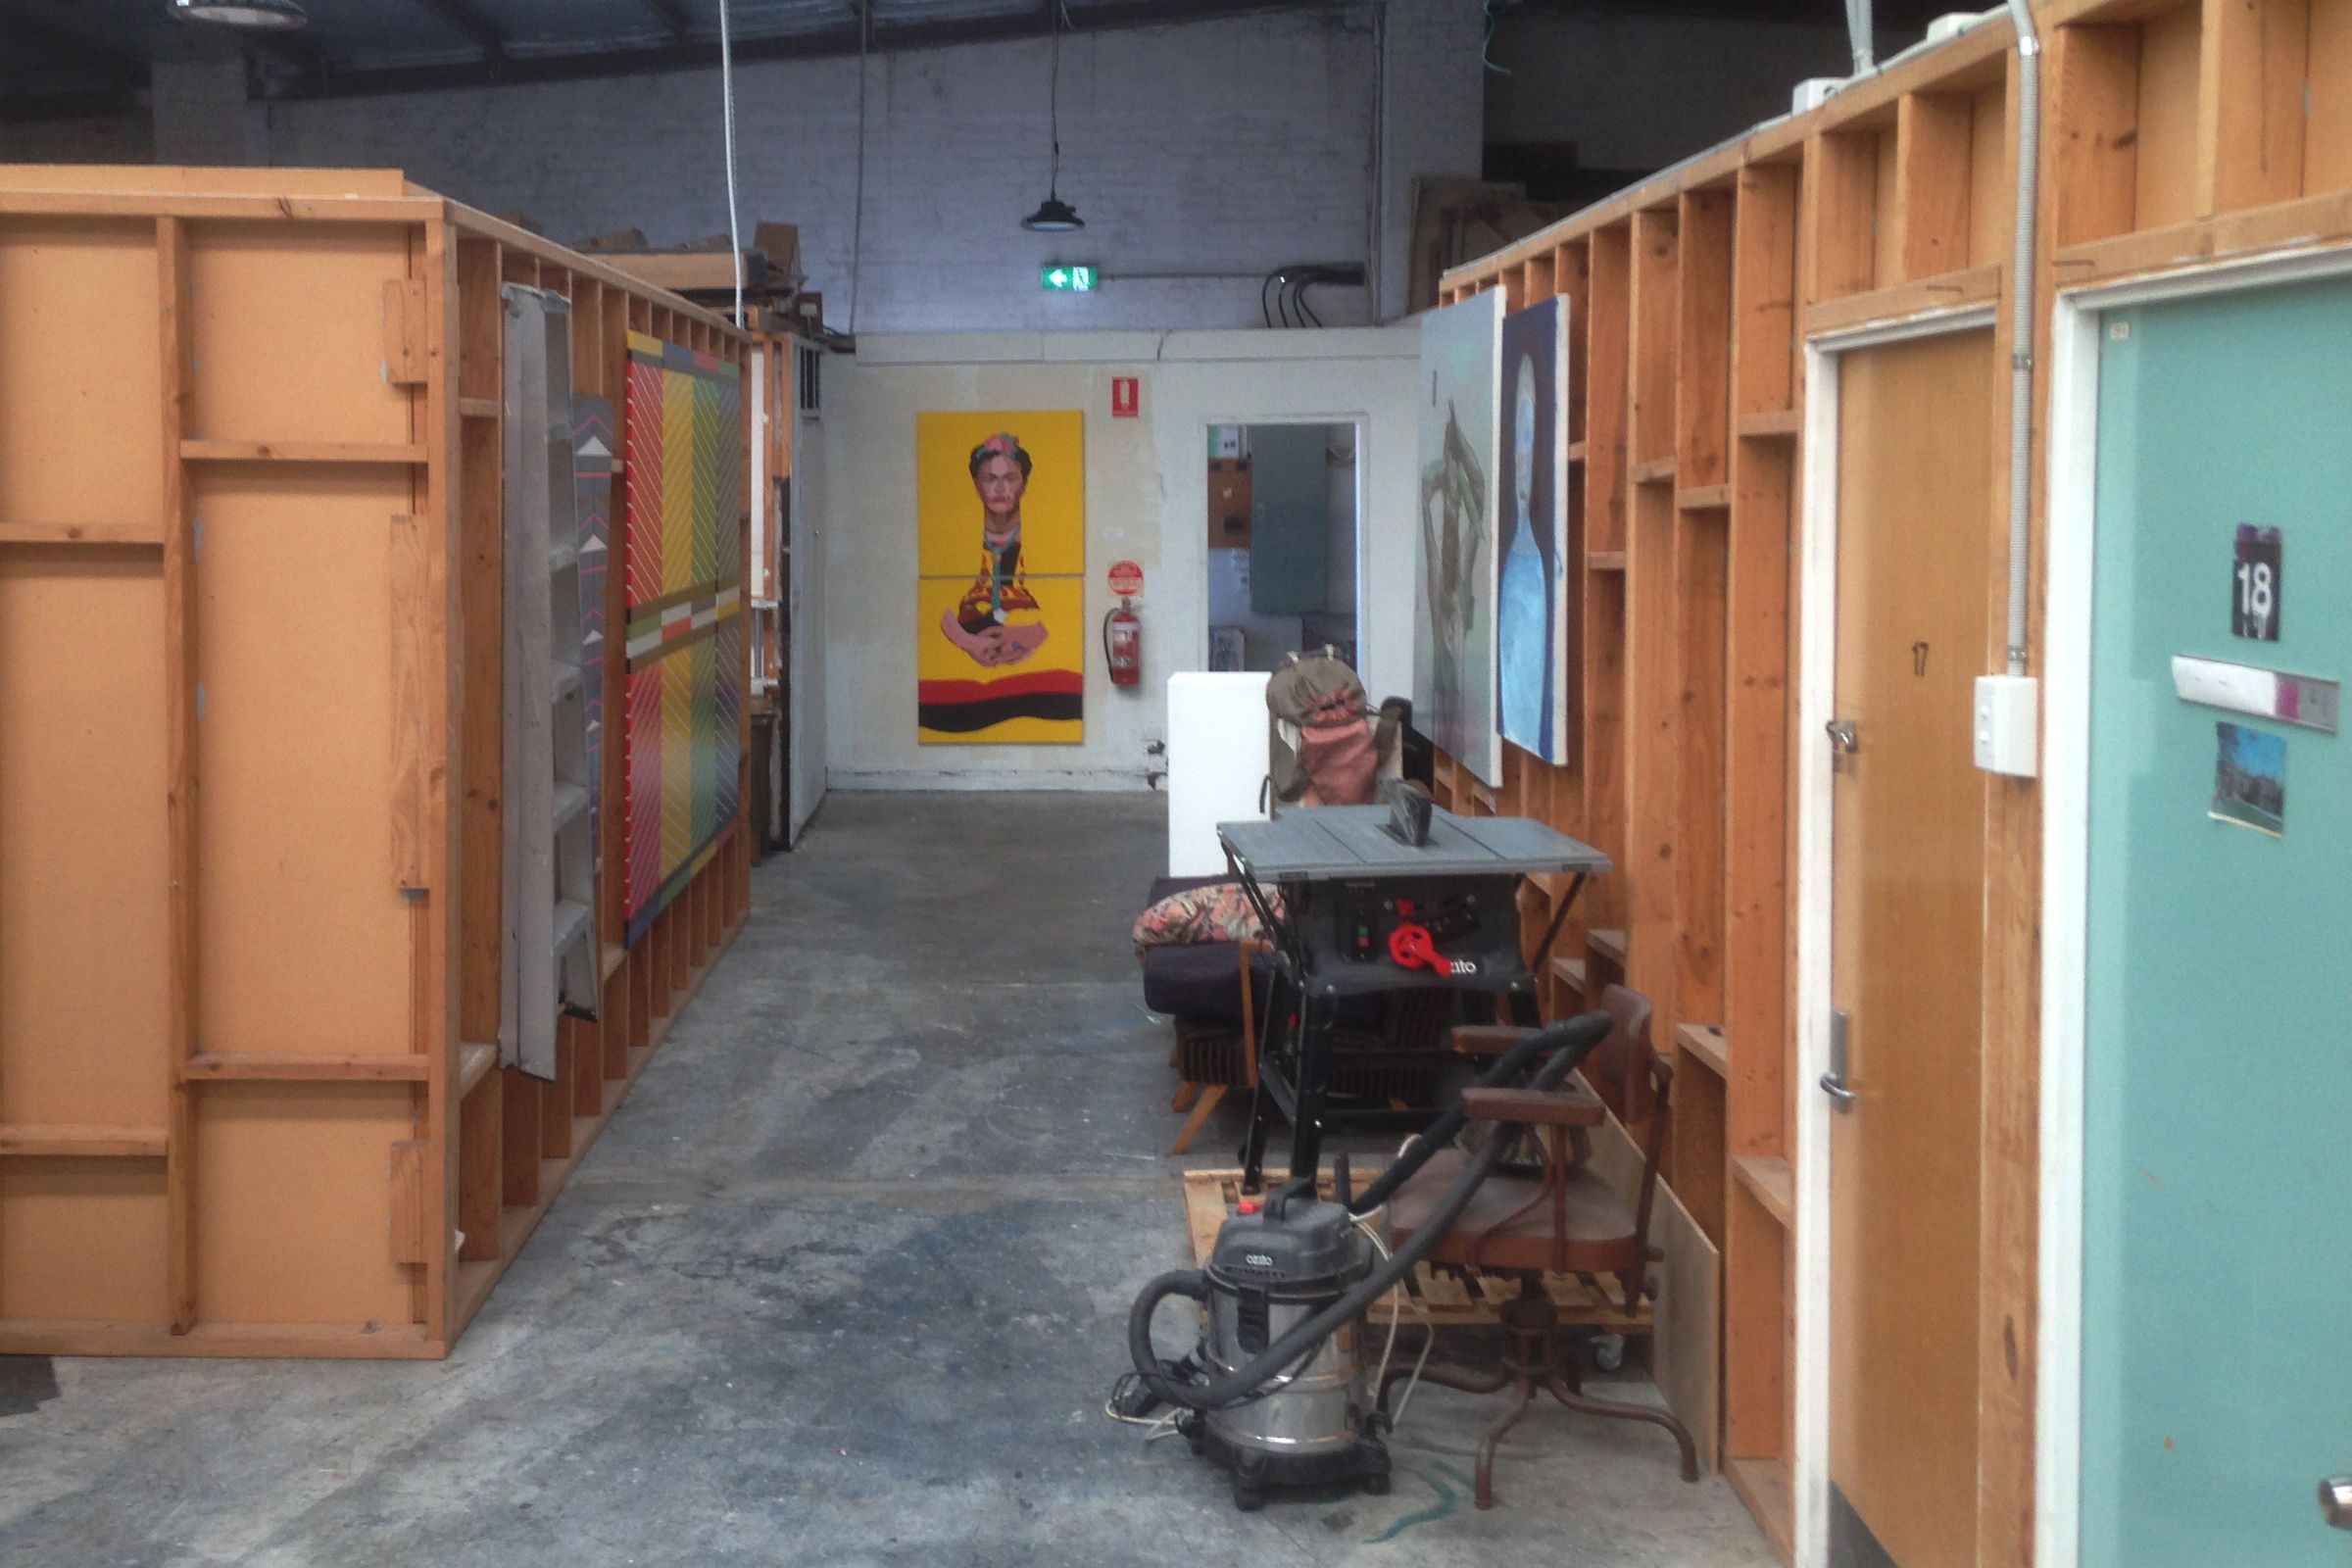 A shared warehouse space with wooden partitions creating smaller studios with different coloured doors